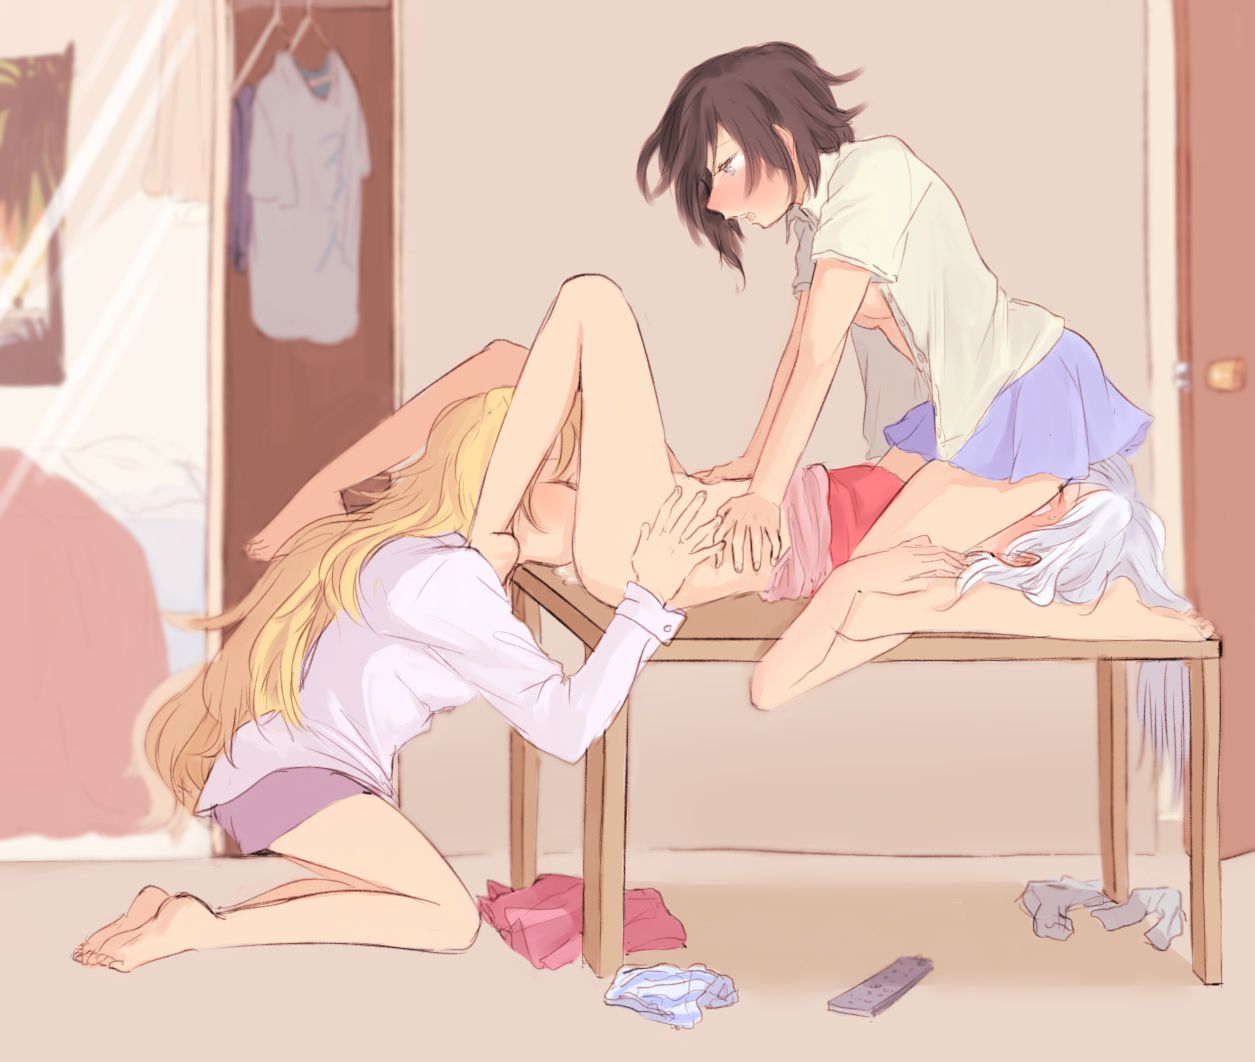 Erotic anime summary Erotic image [secondary erotic] that girls are doing lesbian crabs 10